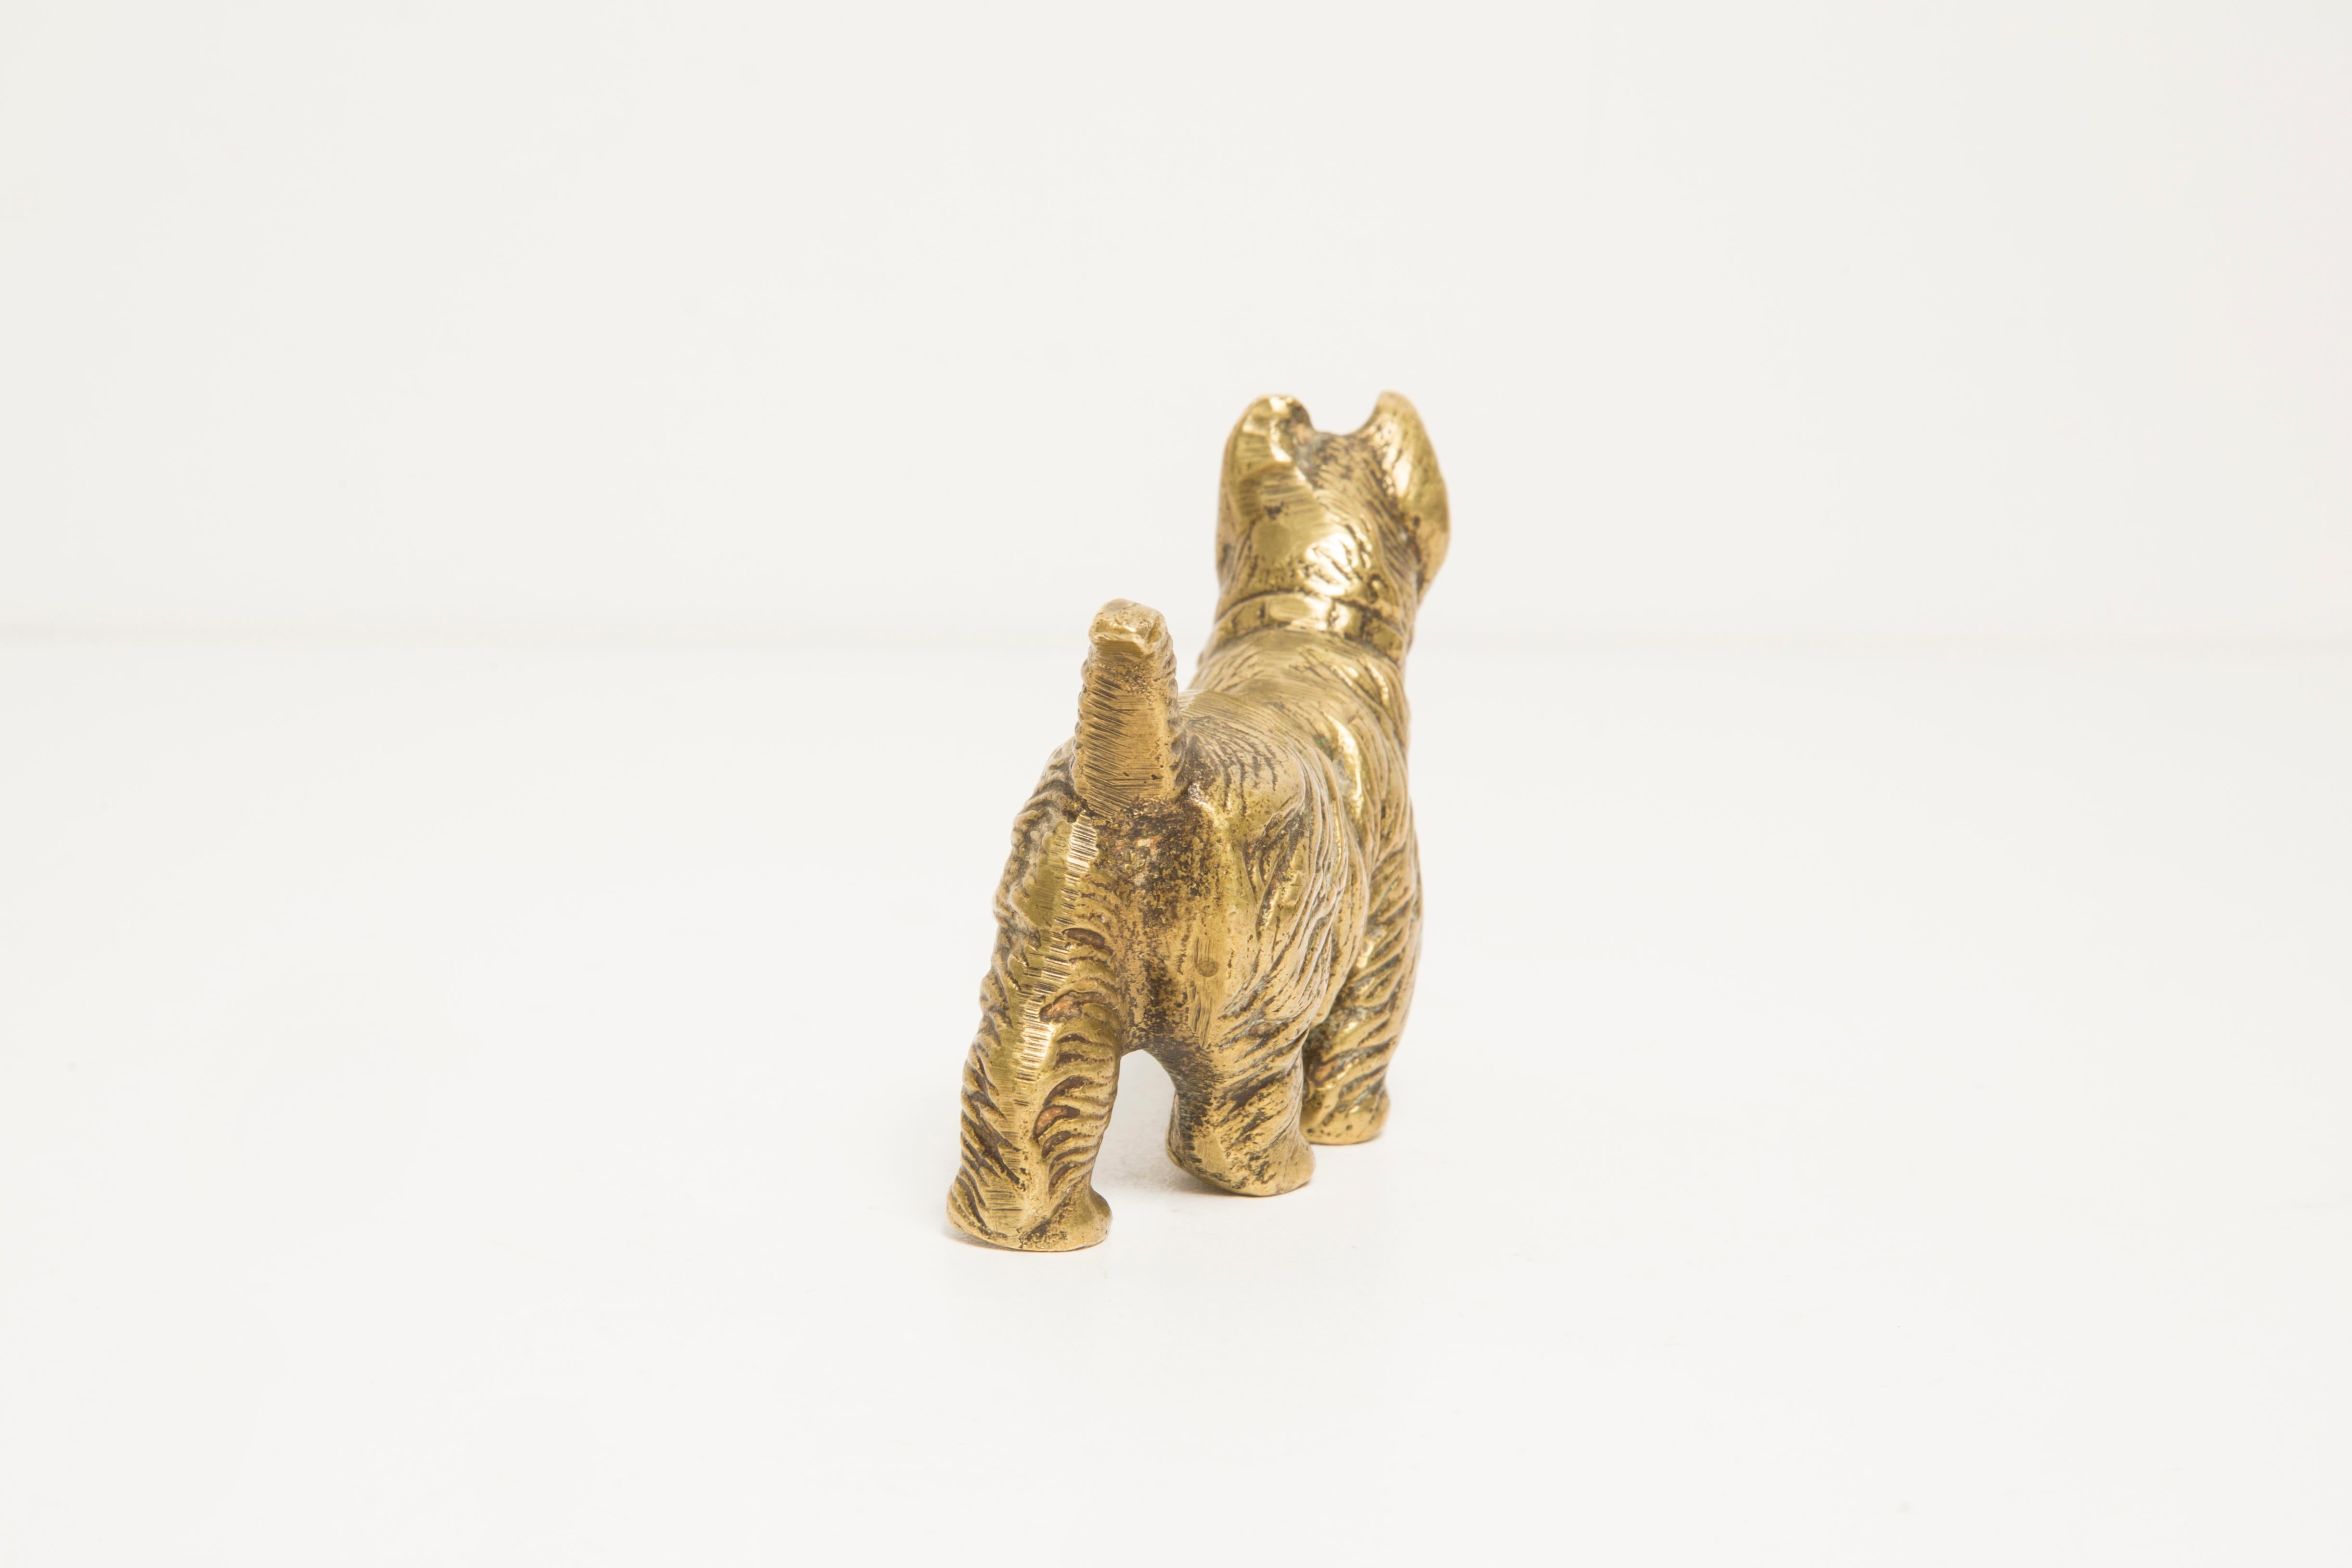 Midcentury West Terrier Dog Gold Metal Decorative Sculpture, Italy, 1950s For Sale 2